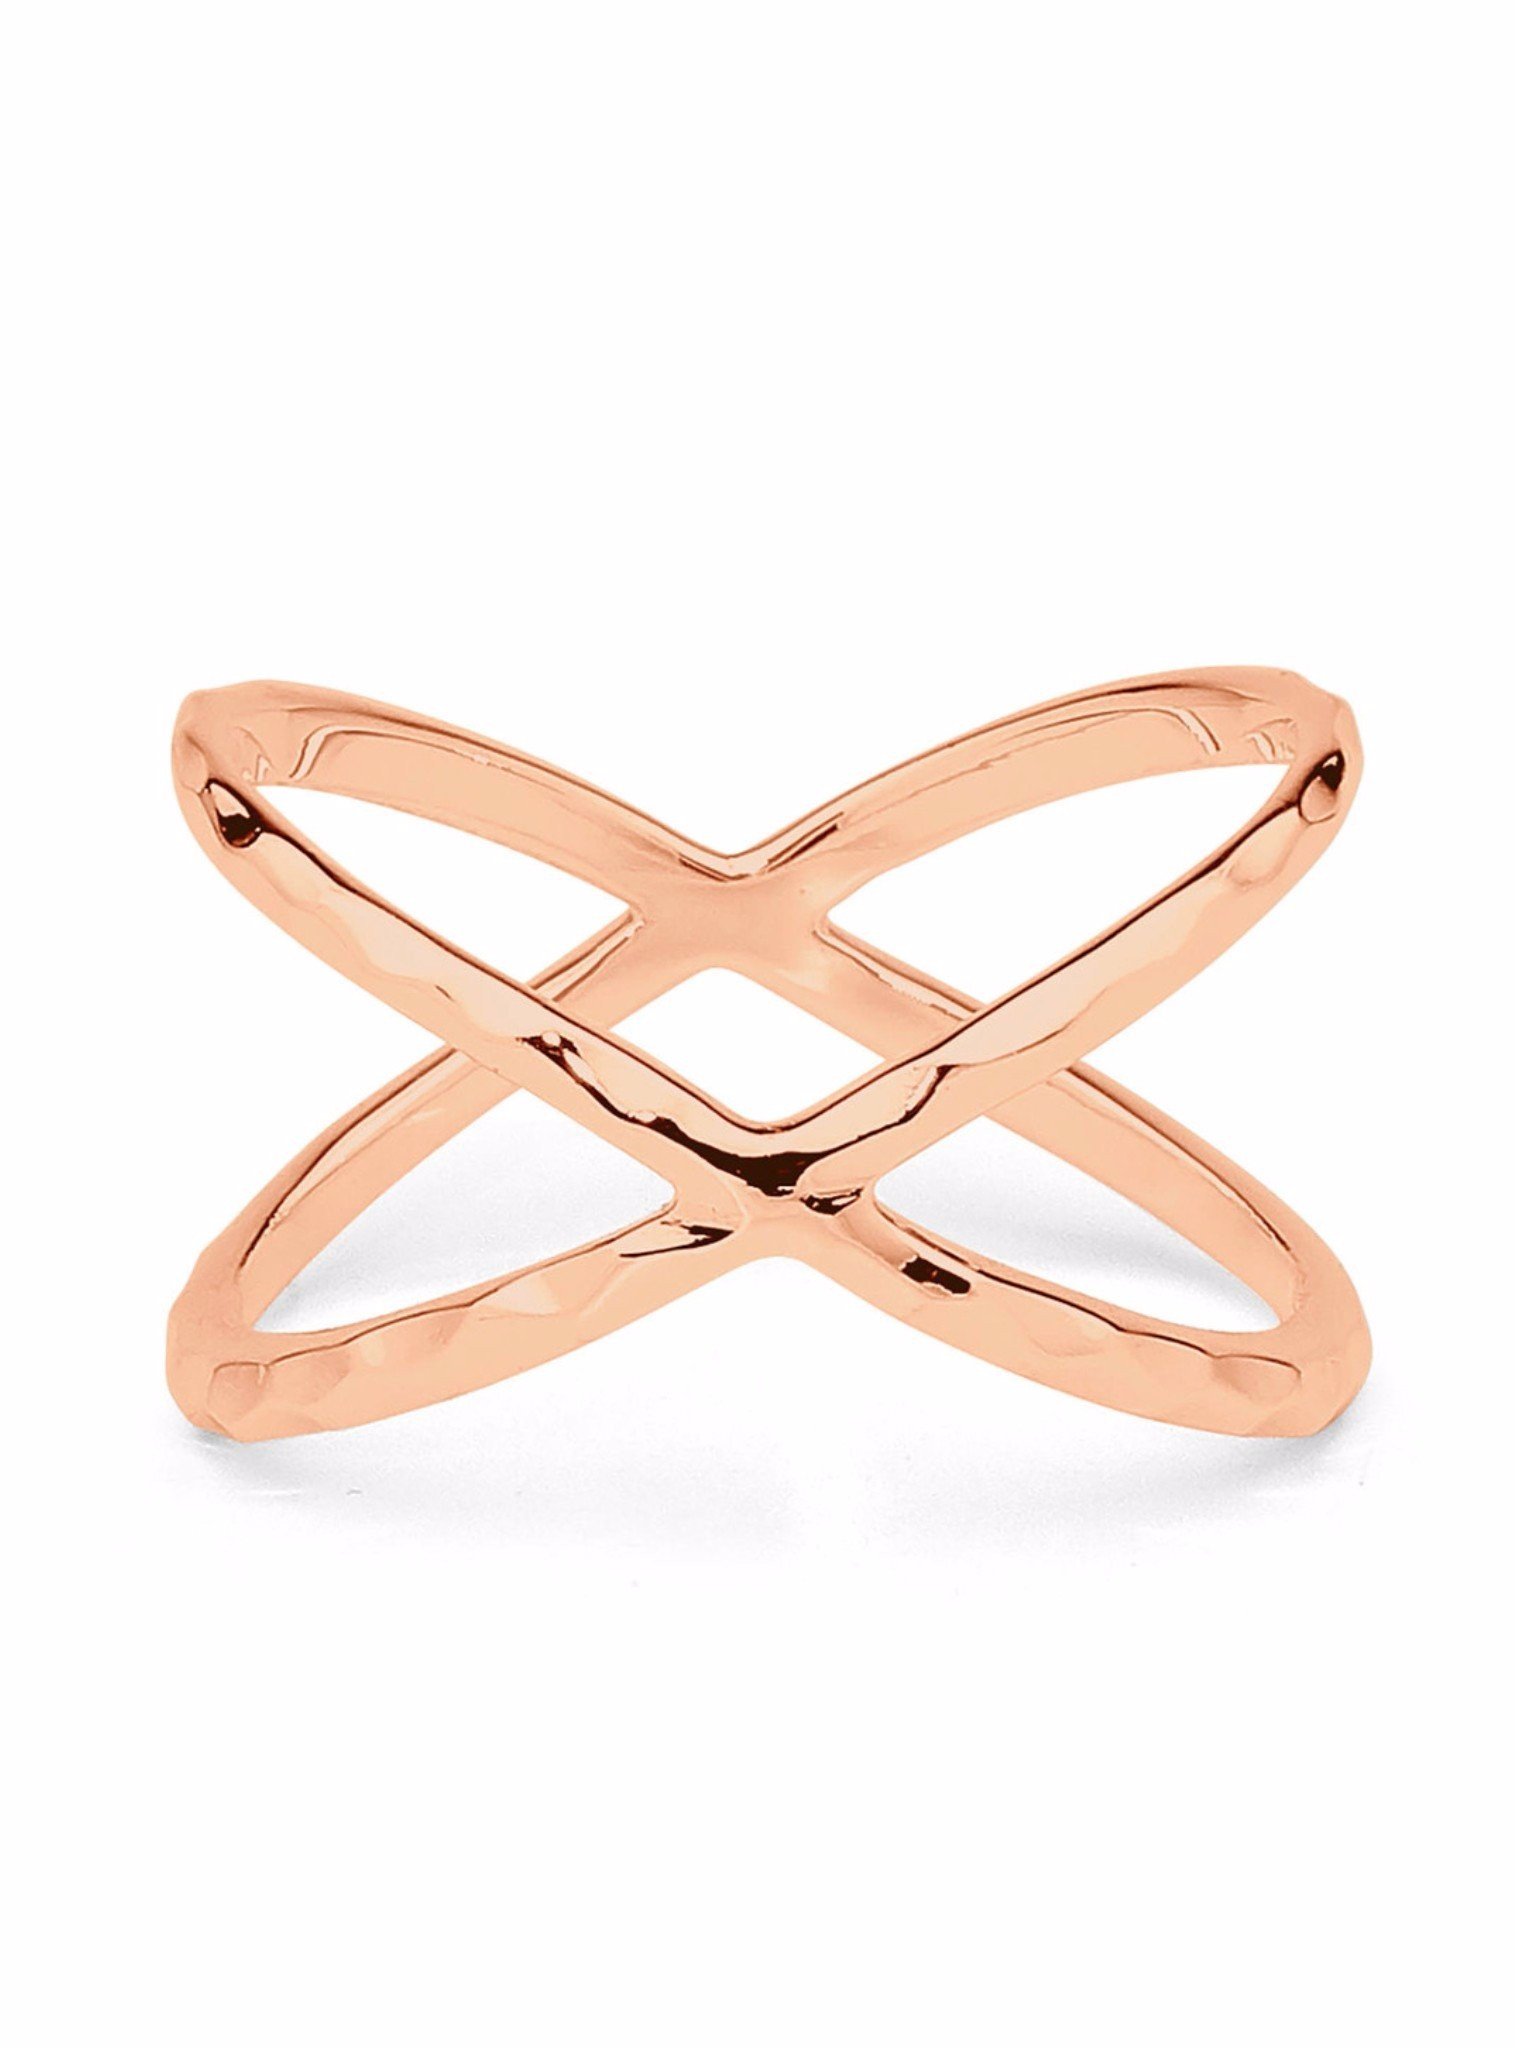 14K Rose Gold Plated Plain X Criss Cross Long Ring Beautiful Jewelry Box Included 